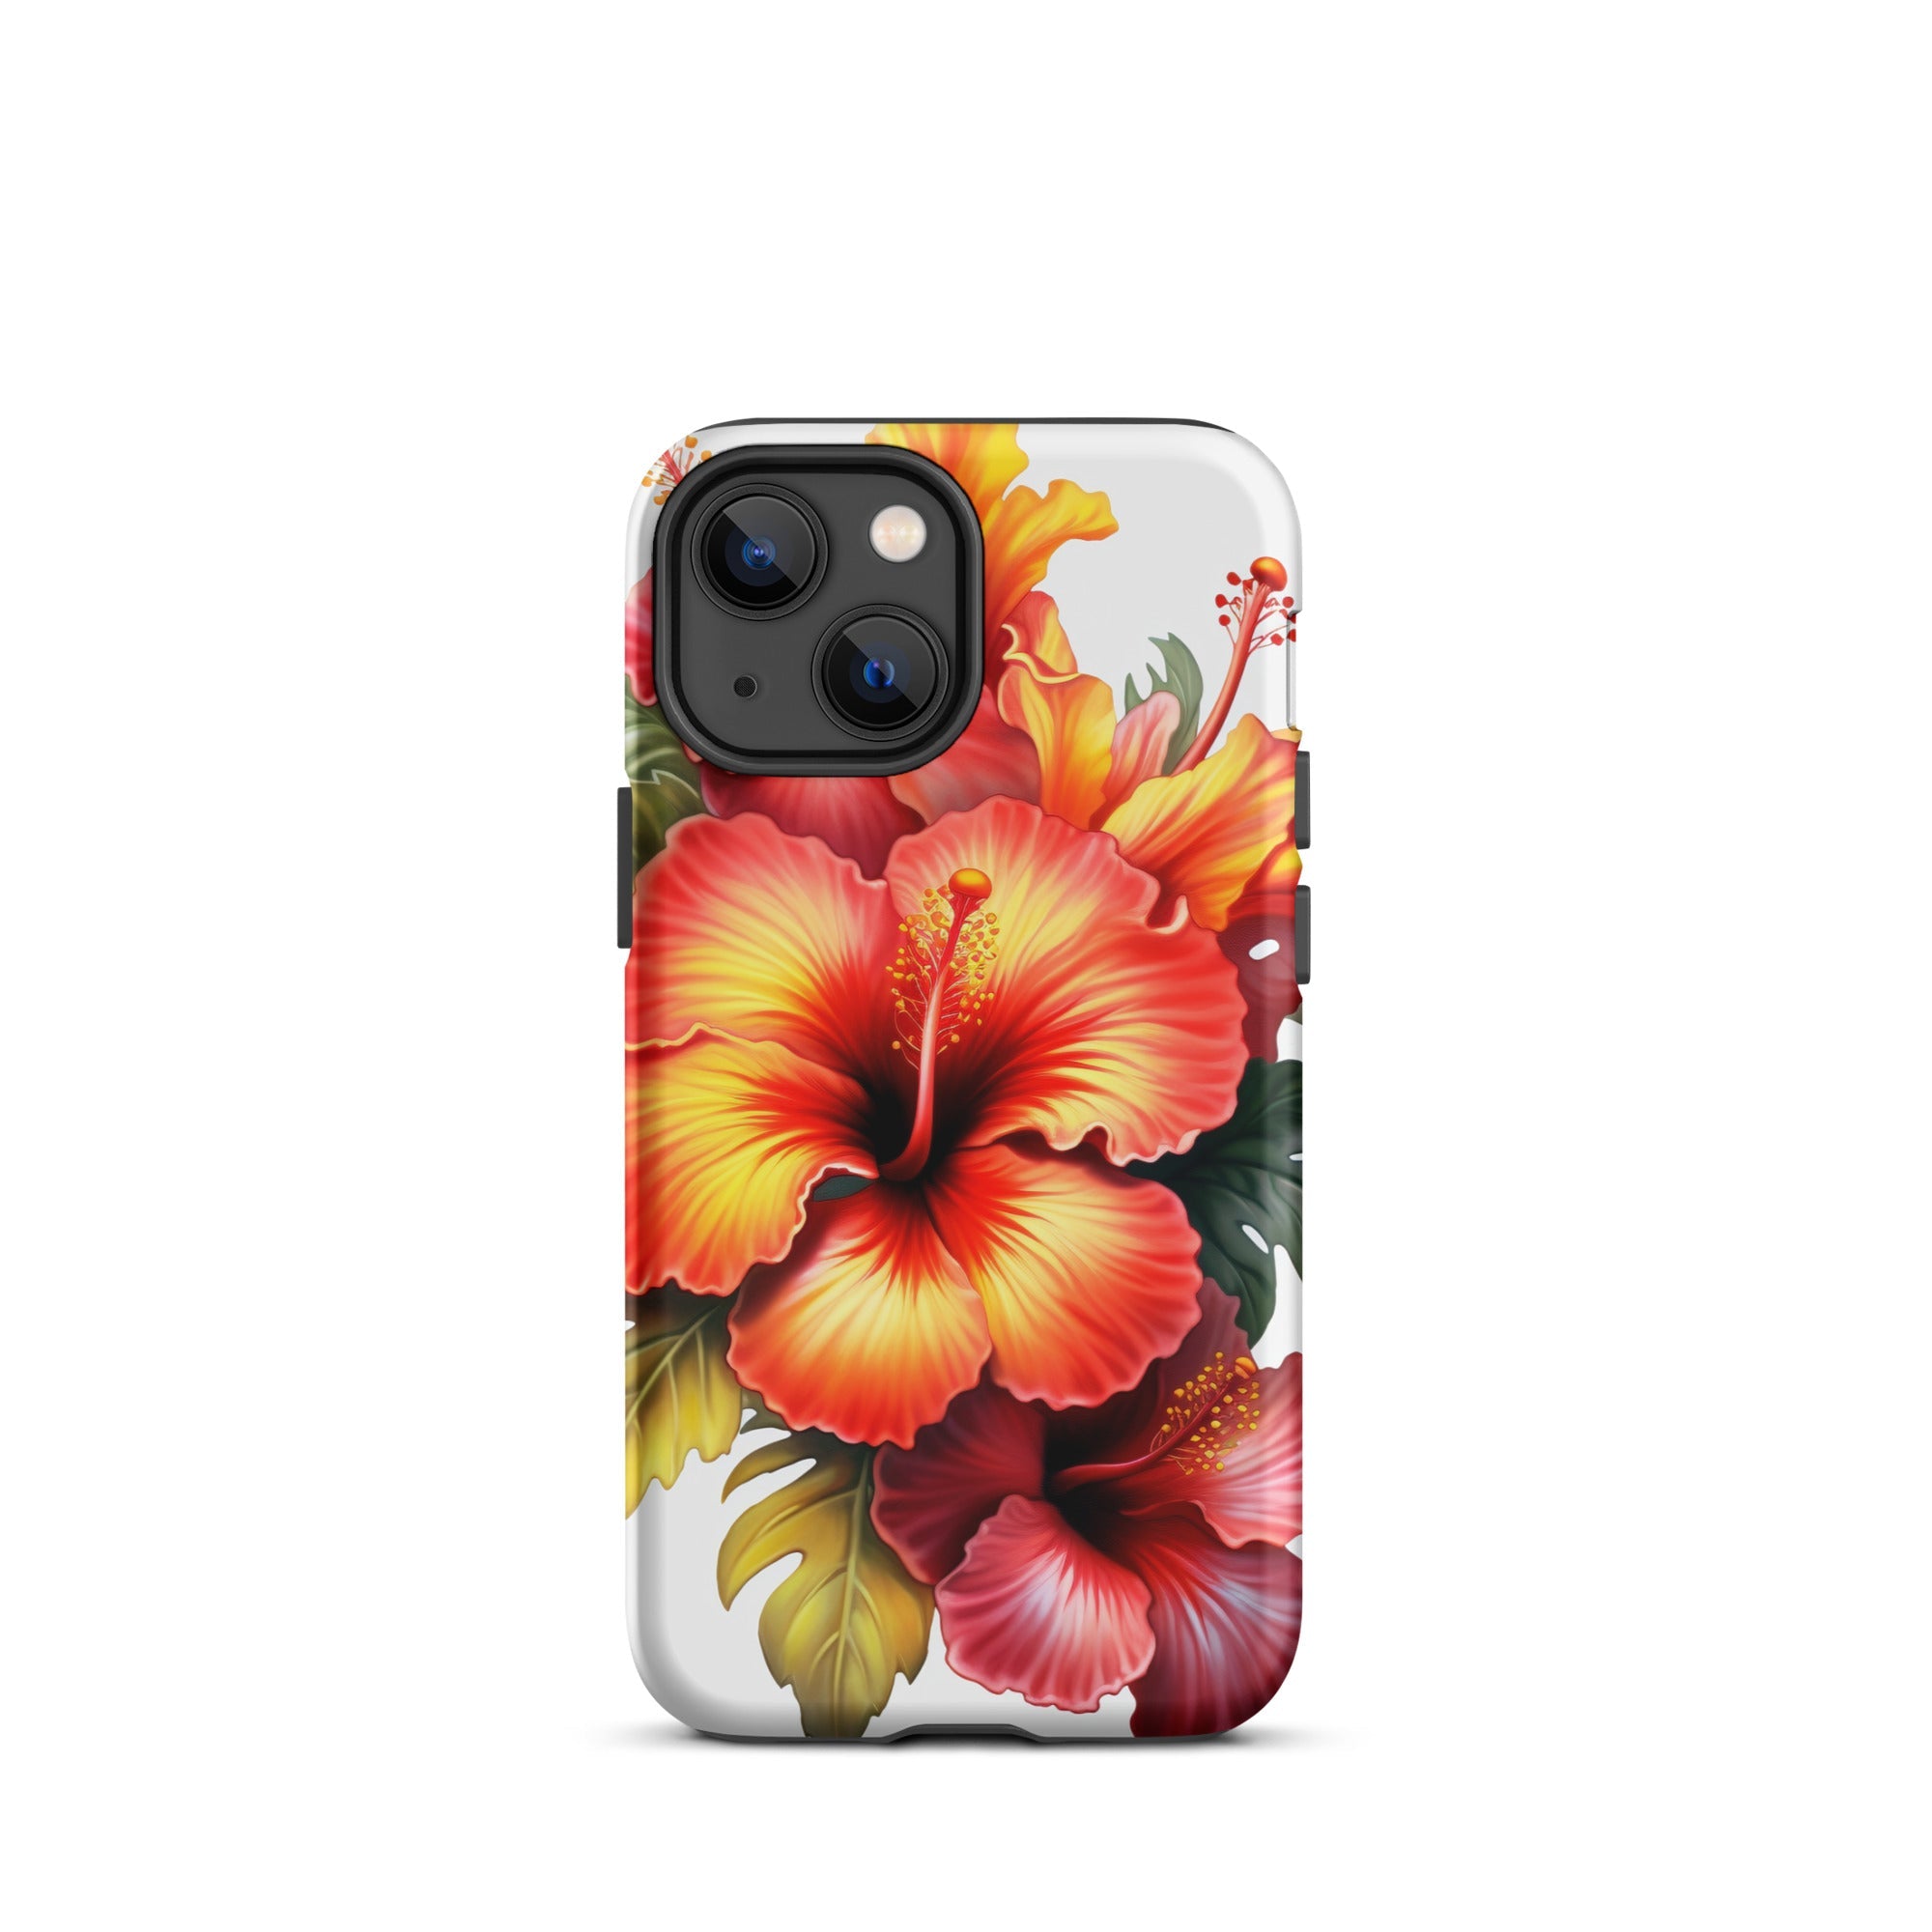 Hibiscus Flower iPhone Case by Visual Verse - Image 16